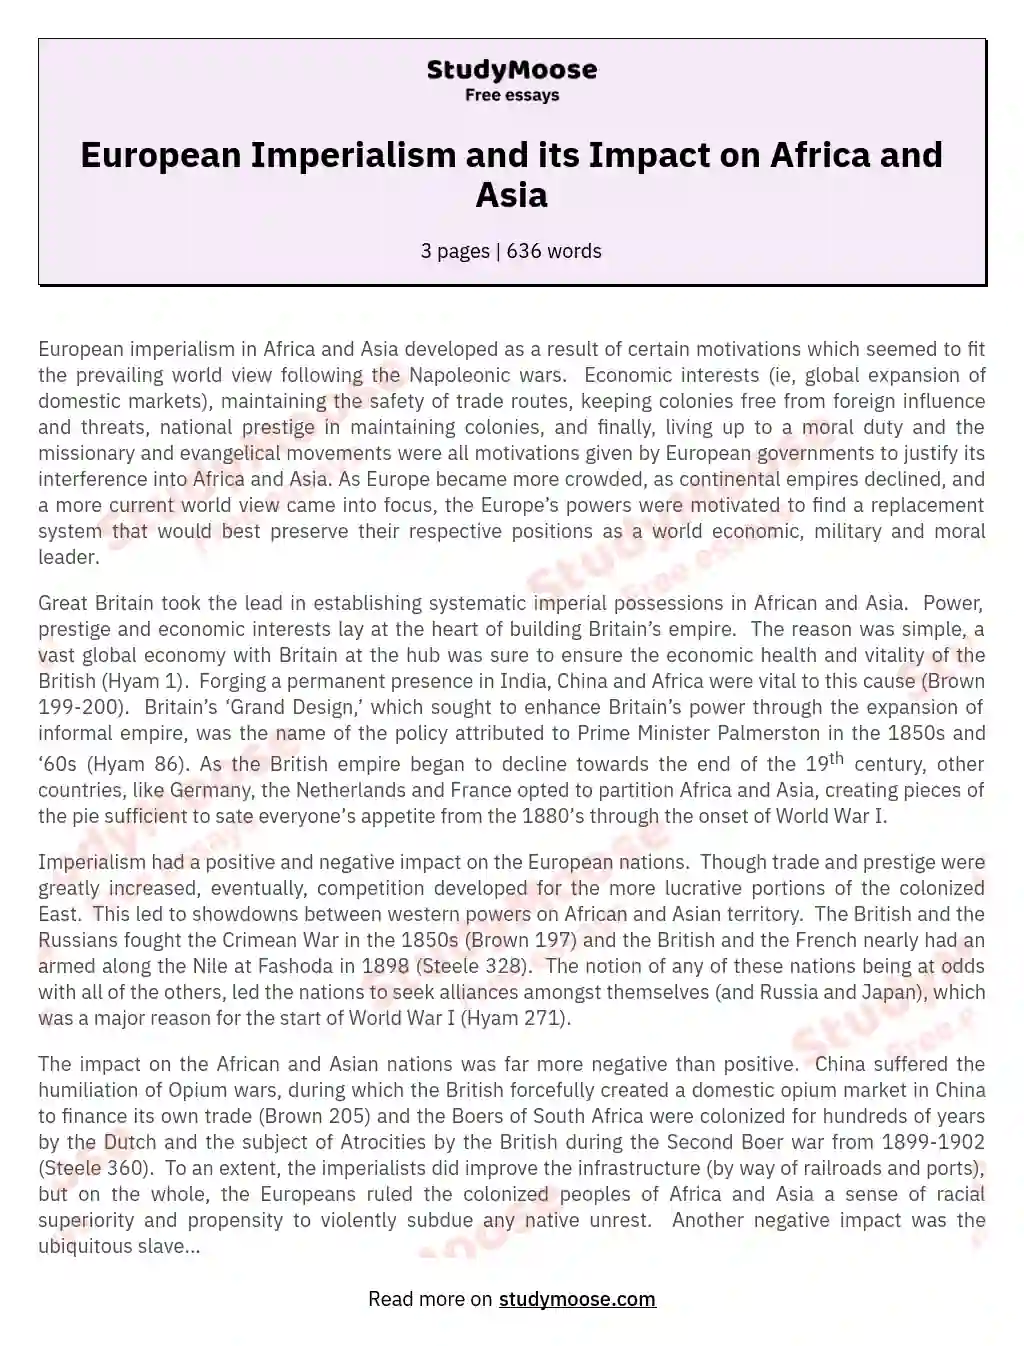 European Imperialism and its Impact on Africa and Asia